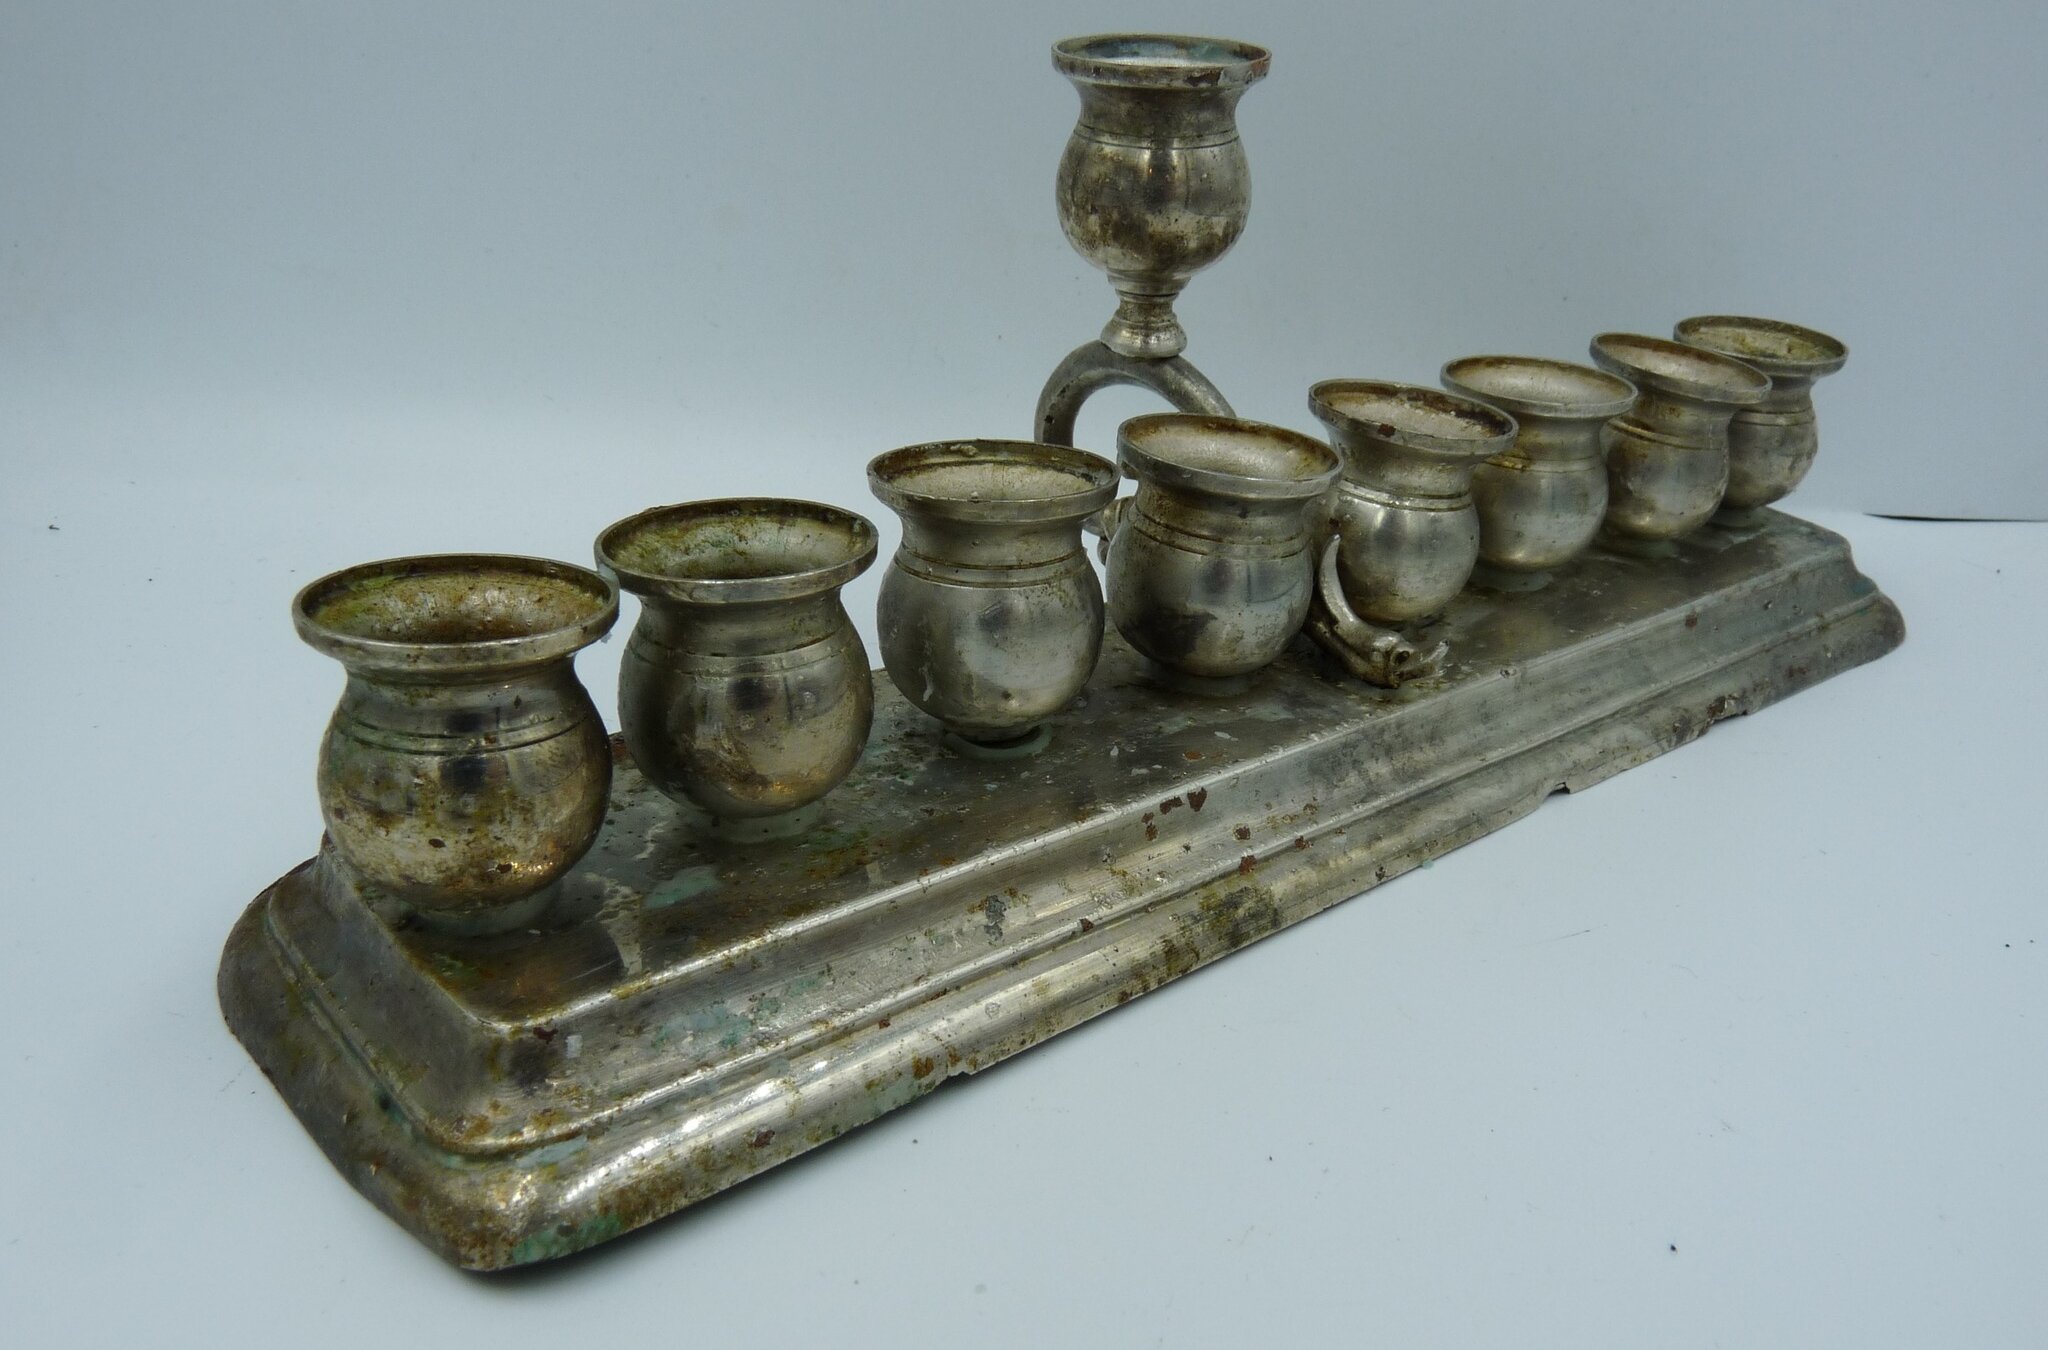 A menorah found by construction workers in a Lodz tenement. (Facebook/Provincial Office for the Protection of Monuments in Łódz; used in accordance with Clause 27a of the Copyright Law)